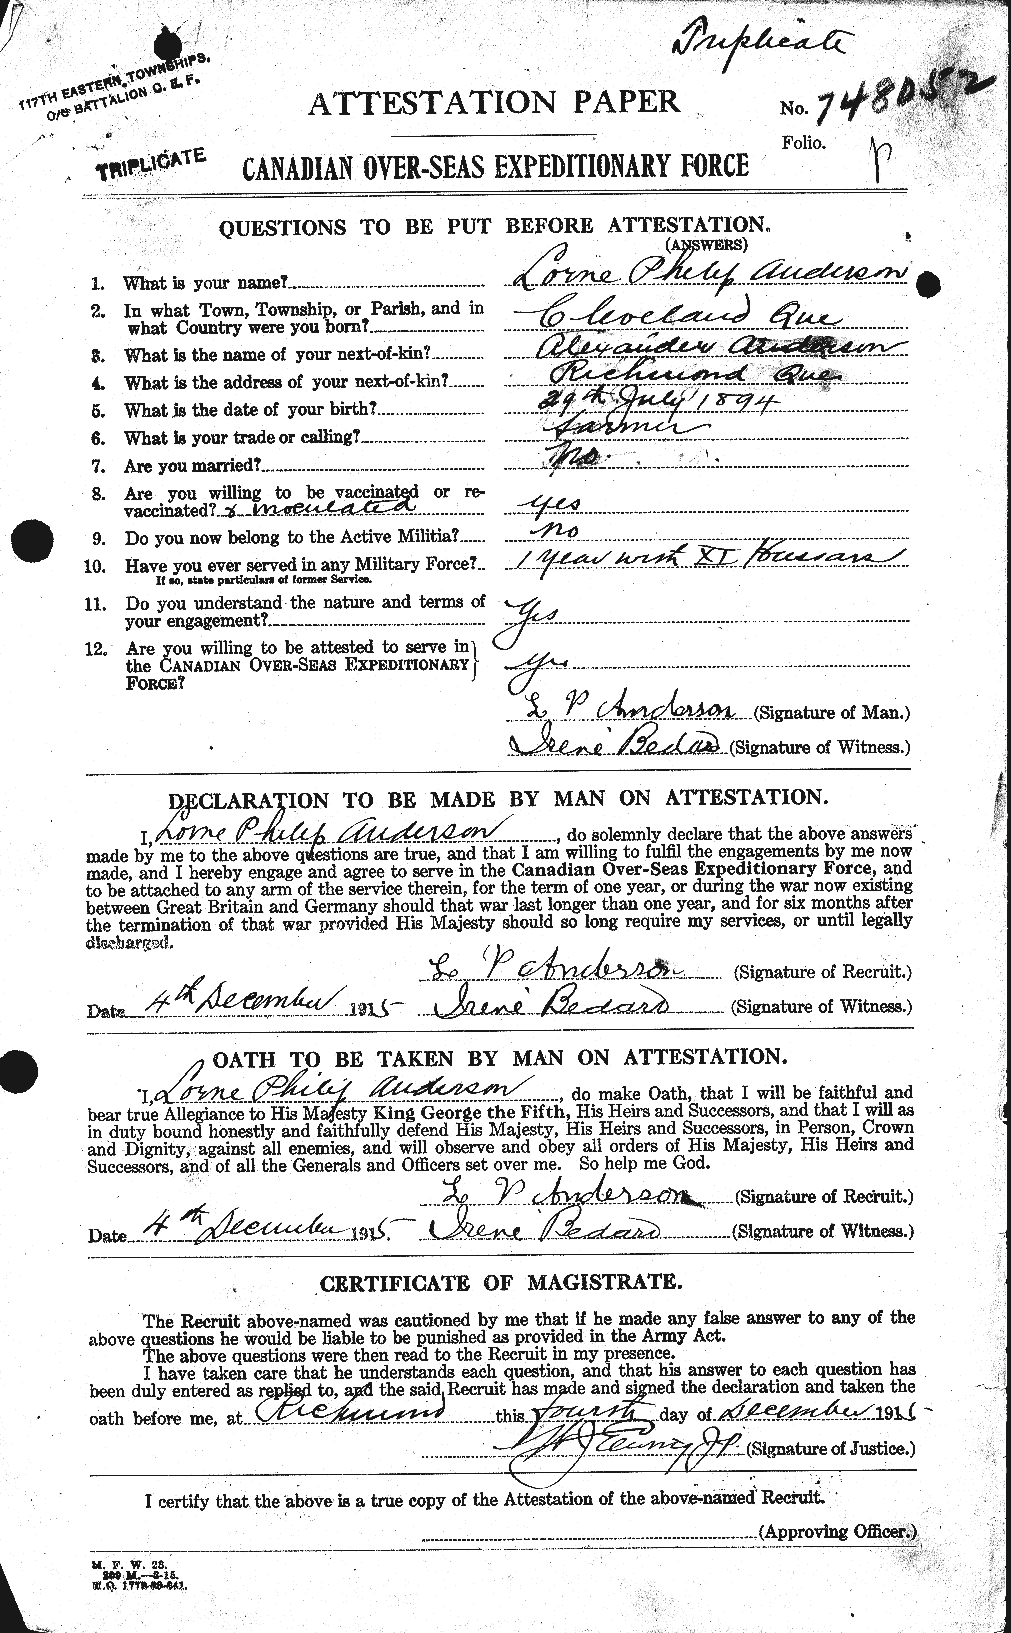 Personnel Records of the First World War - CEF 207509a